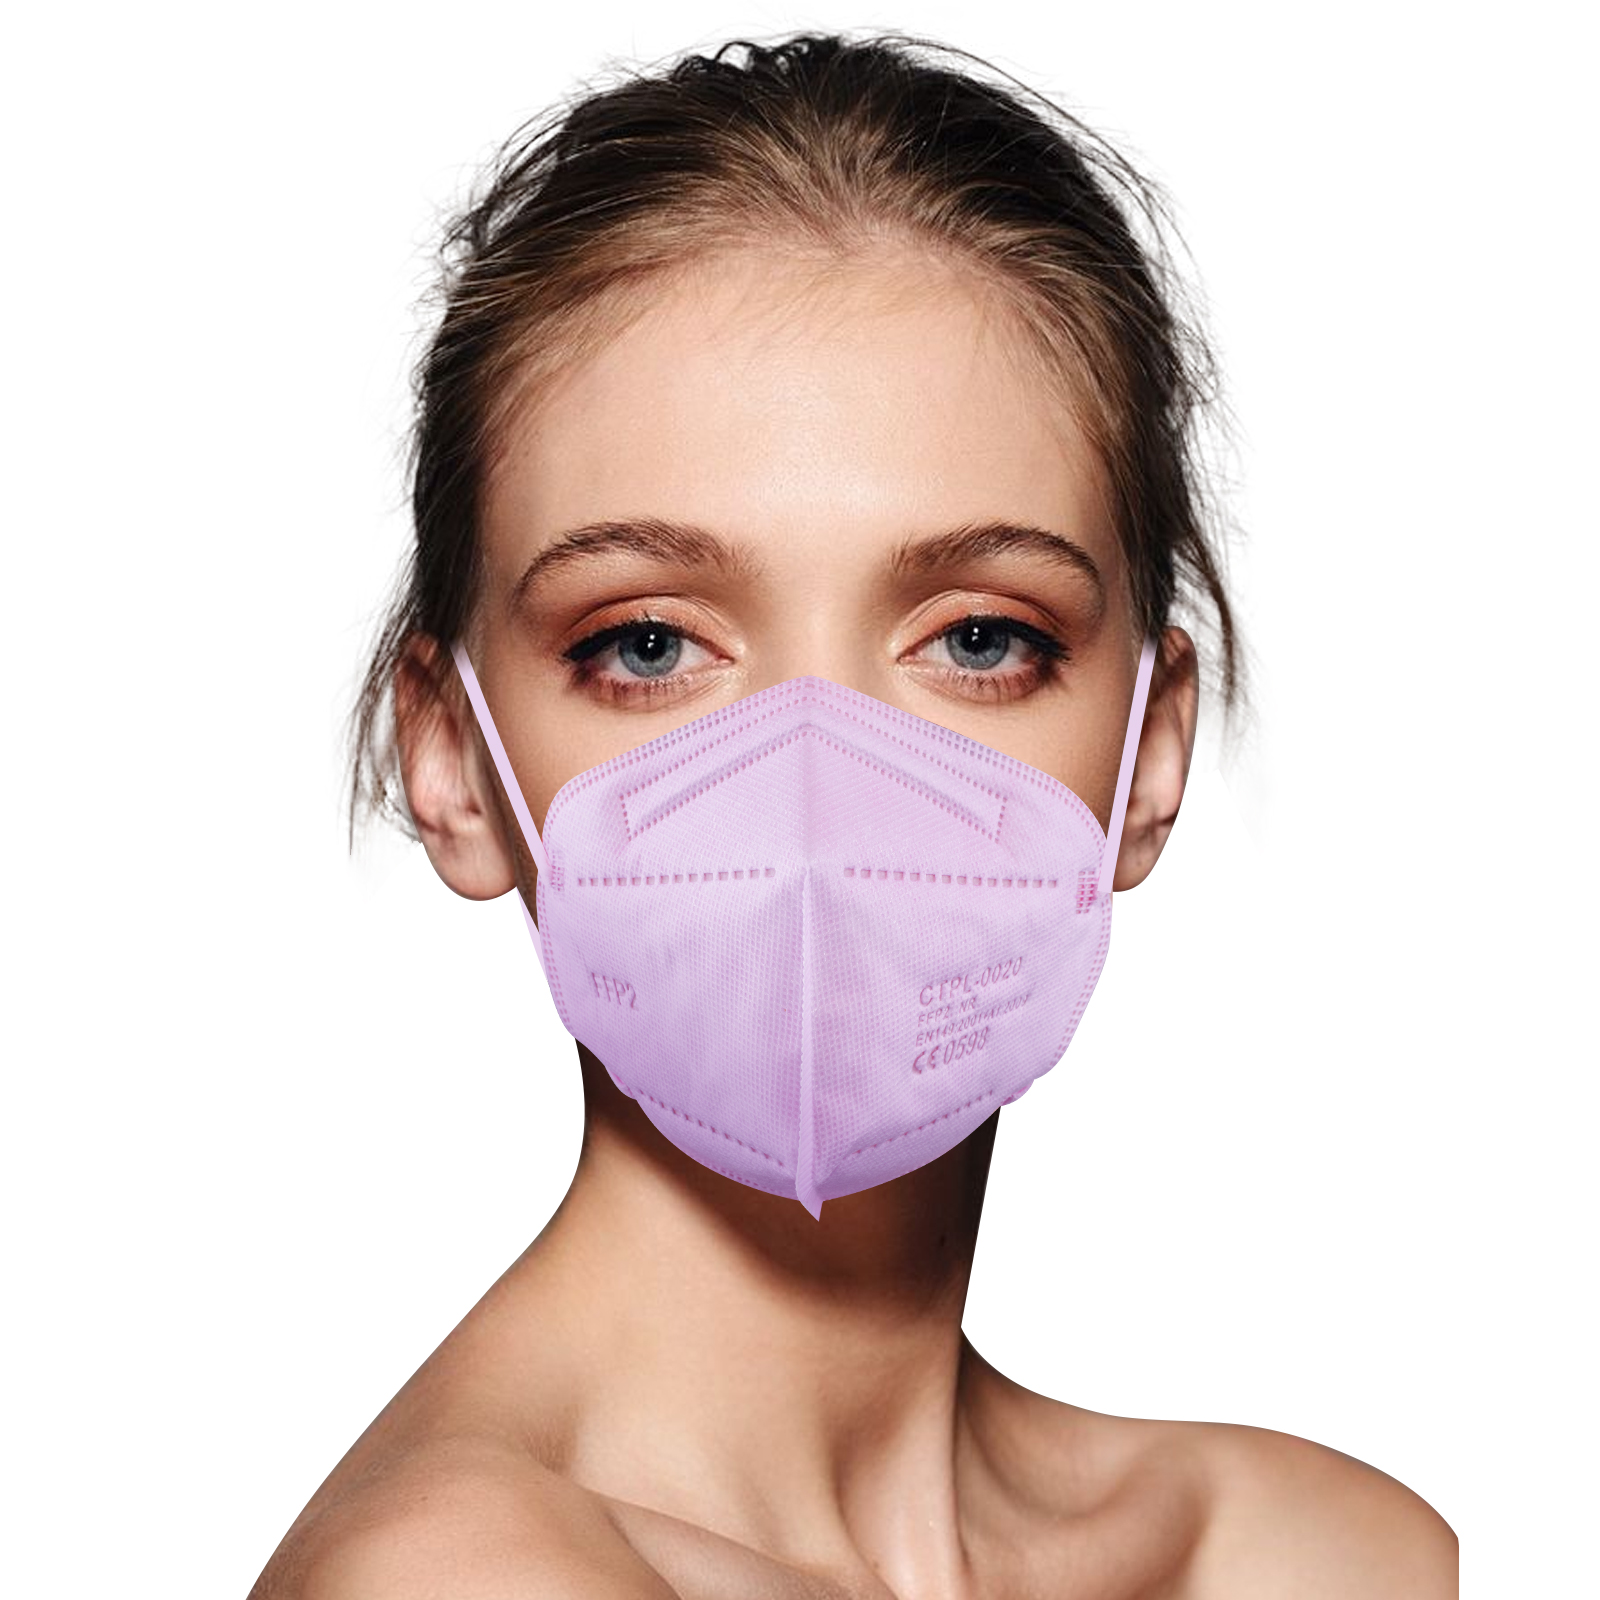 Face Masks Work — But What Makes Them More Effective ? The Latest On Layers And Particles 